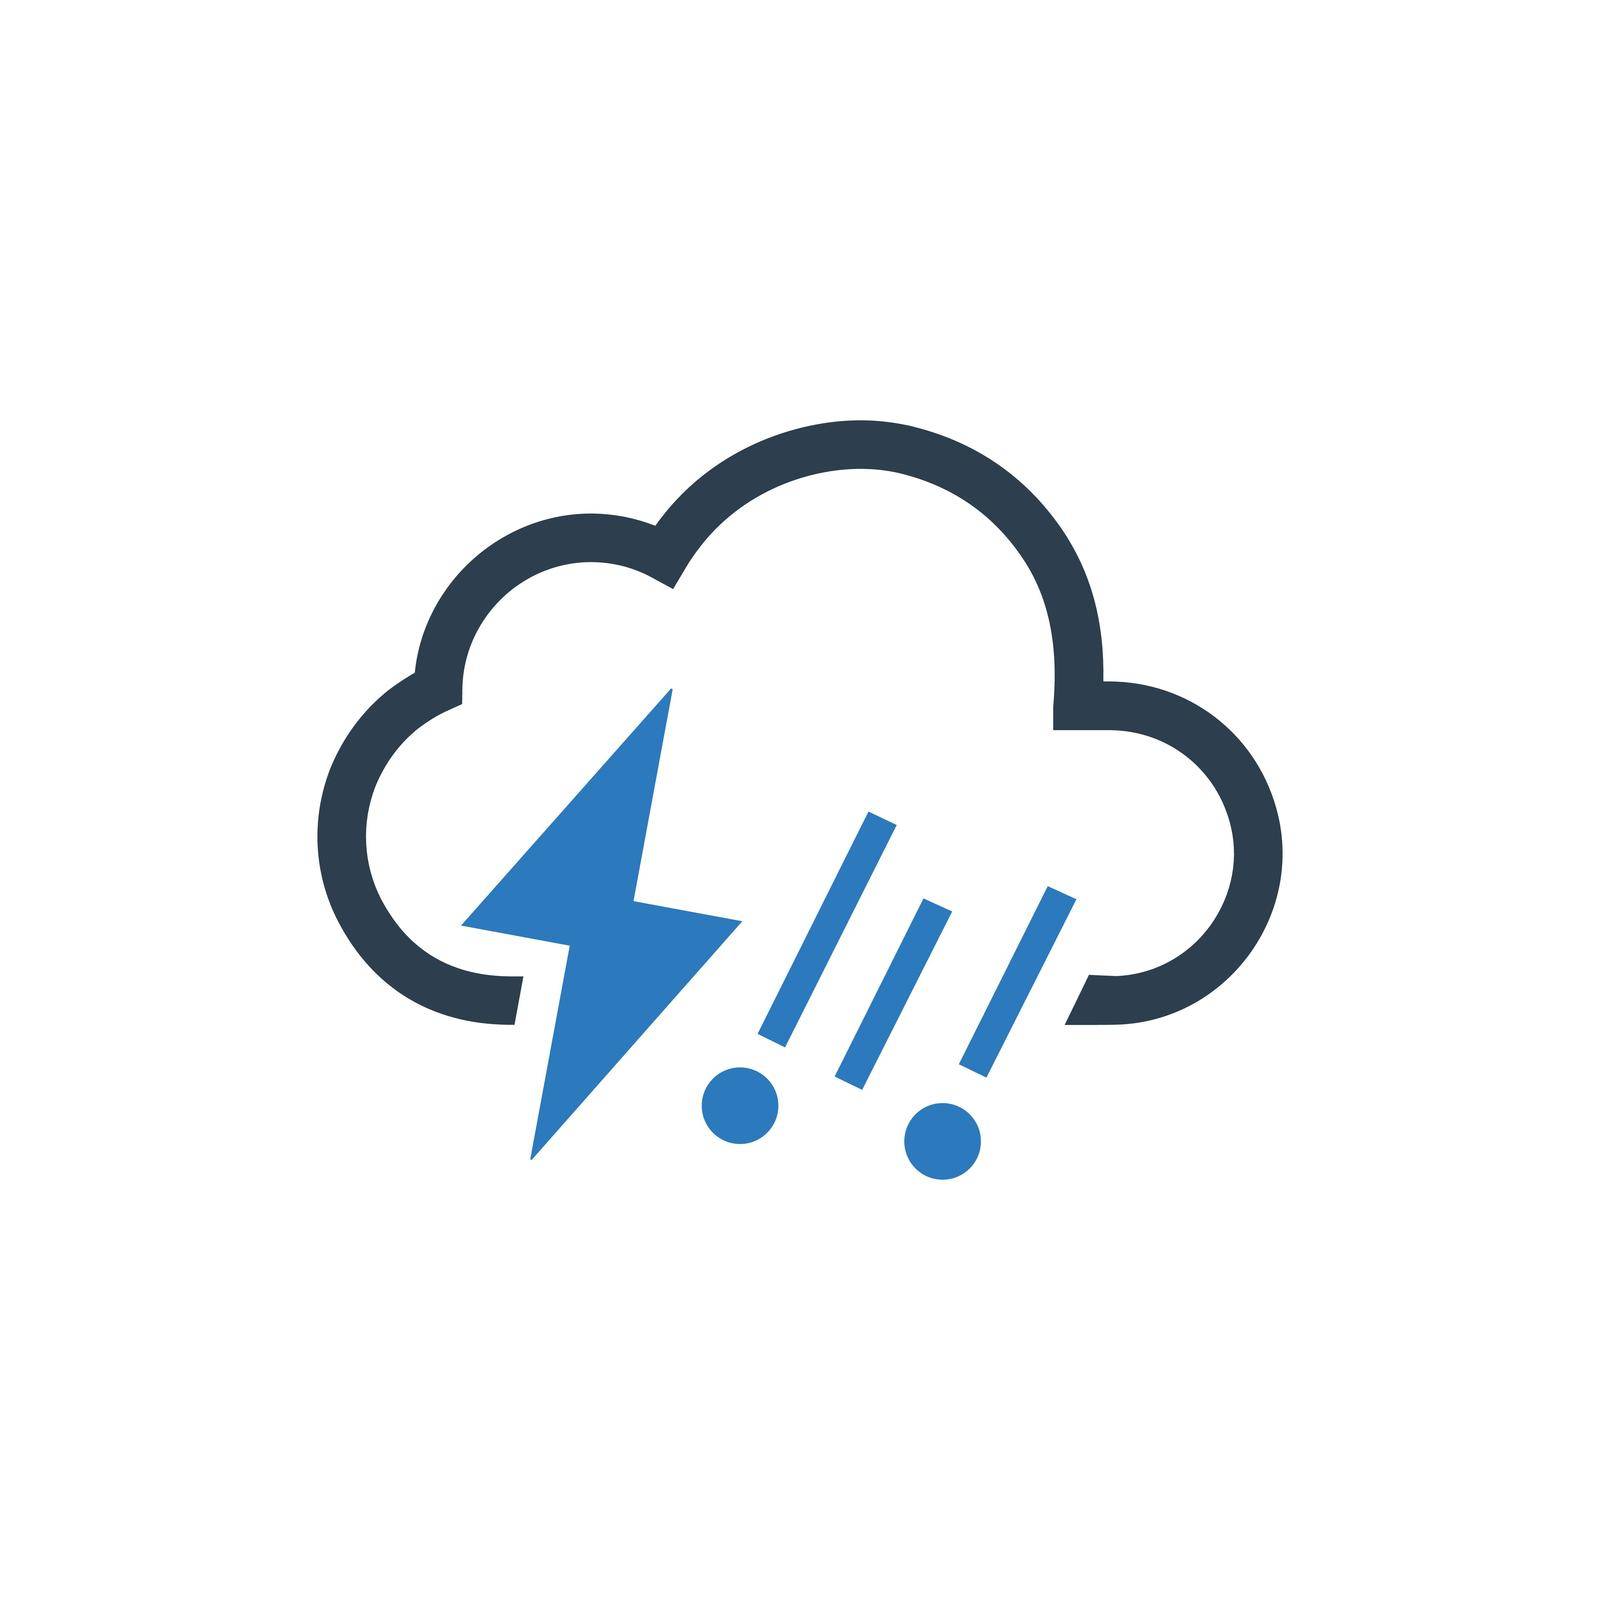 Thunderstorm icon. Meticulously designed vector EPS file.